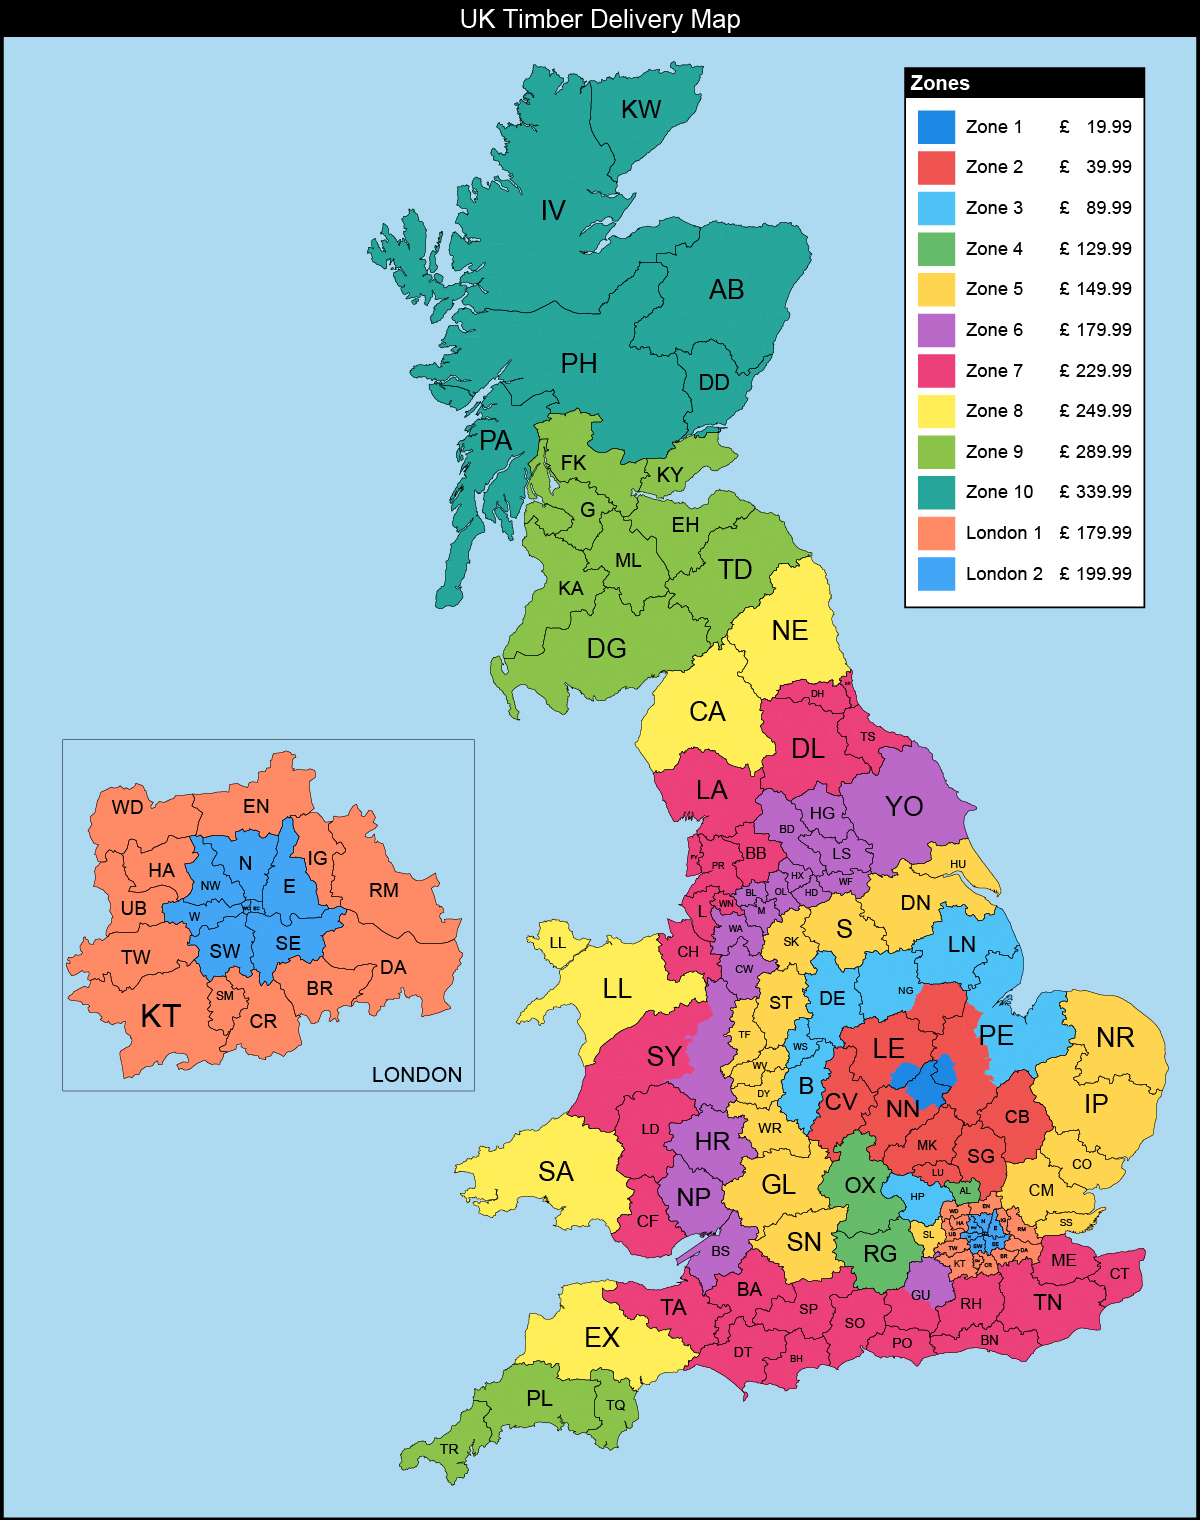 UK Timber Delivery Map